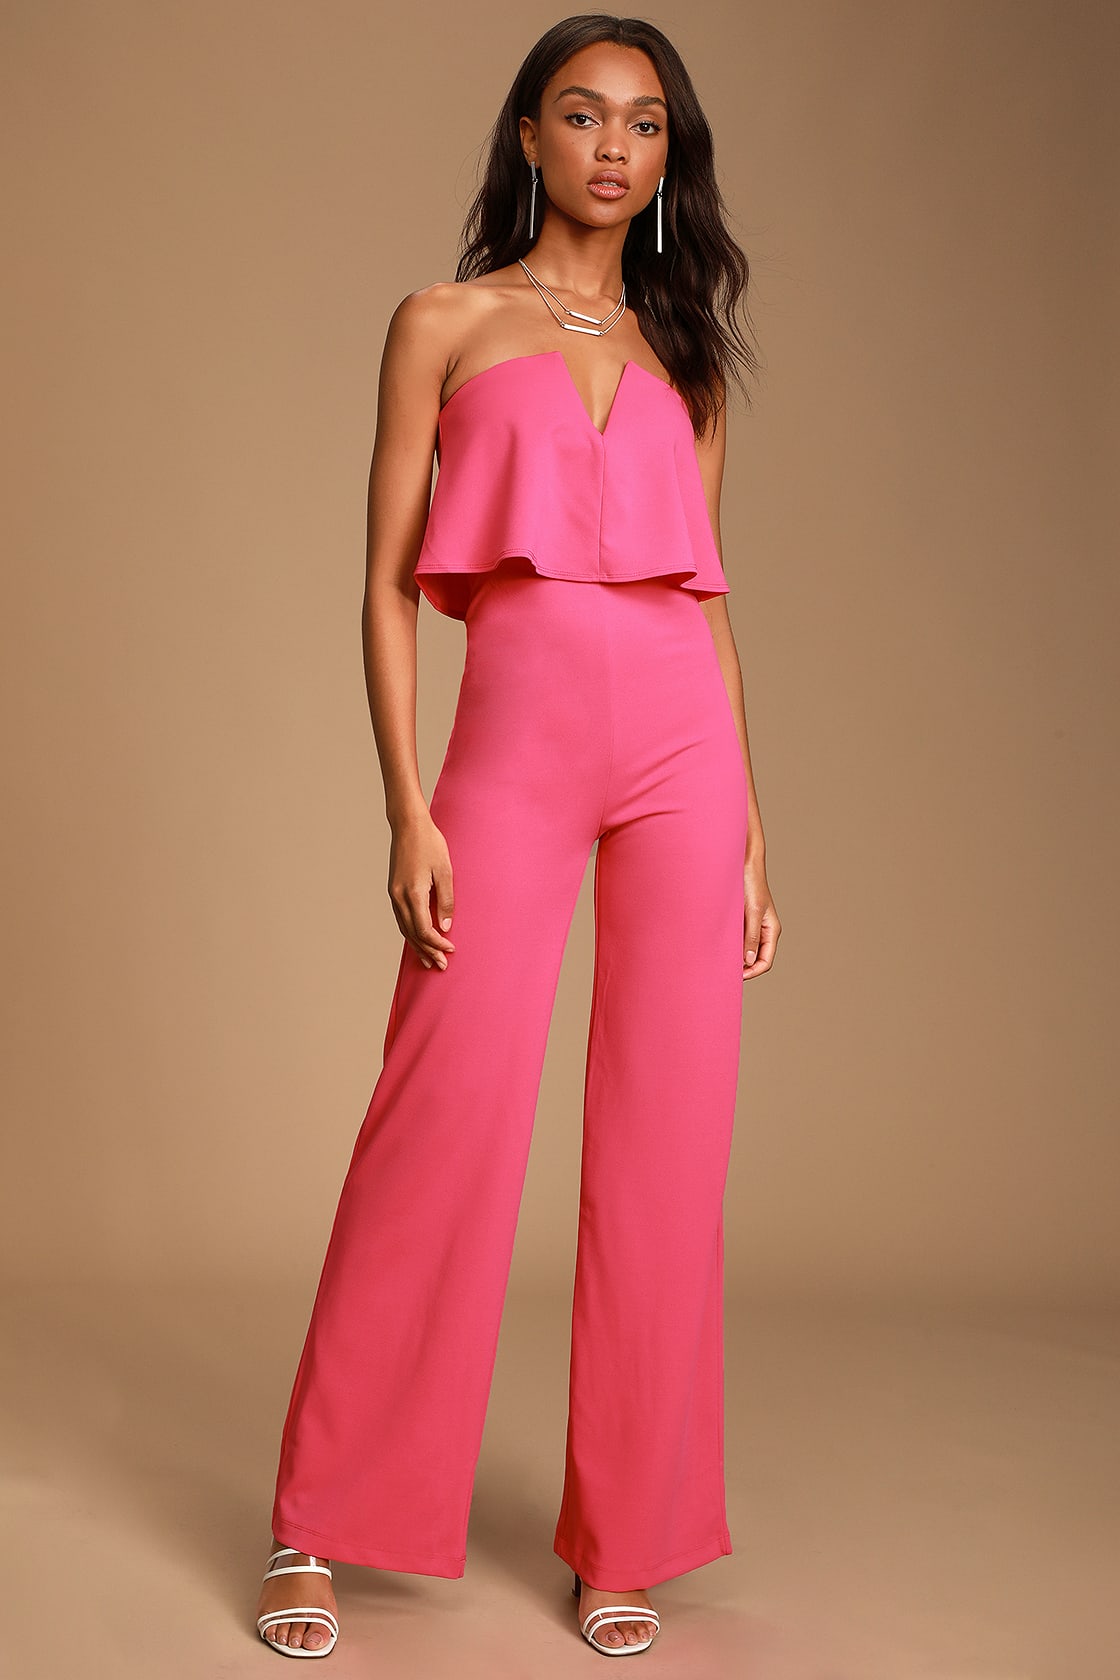 Power of Love Bright Pink Strapless Jumpsuit